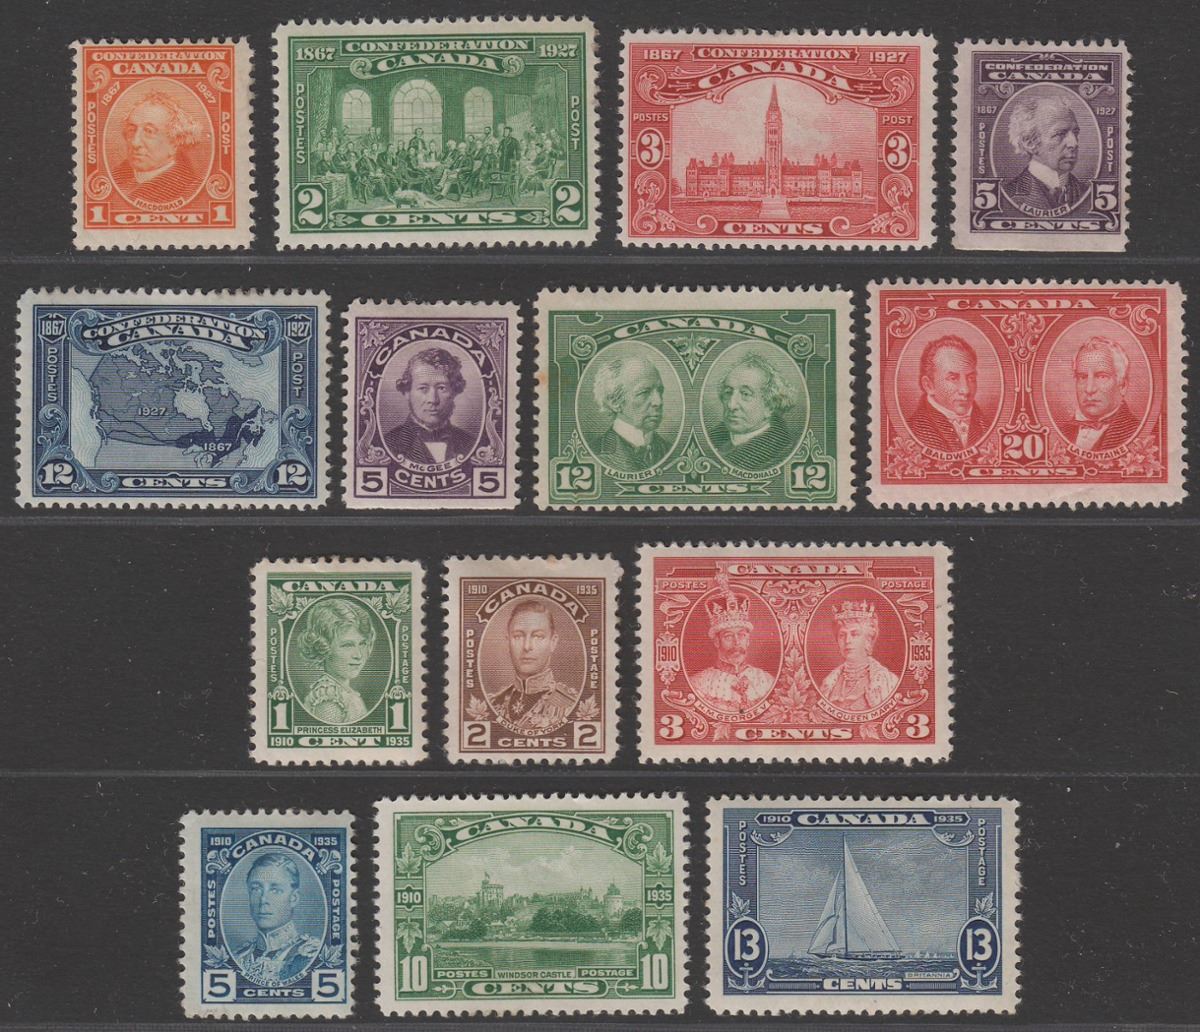 Canada 1927-35 KGV 60th Anniv of Confederation + Silver Jubilee Sets Mostly Mint